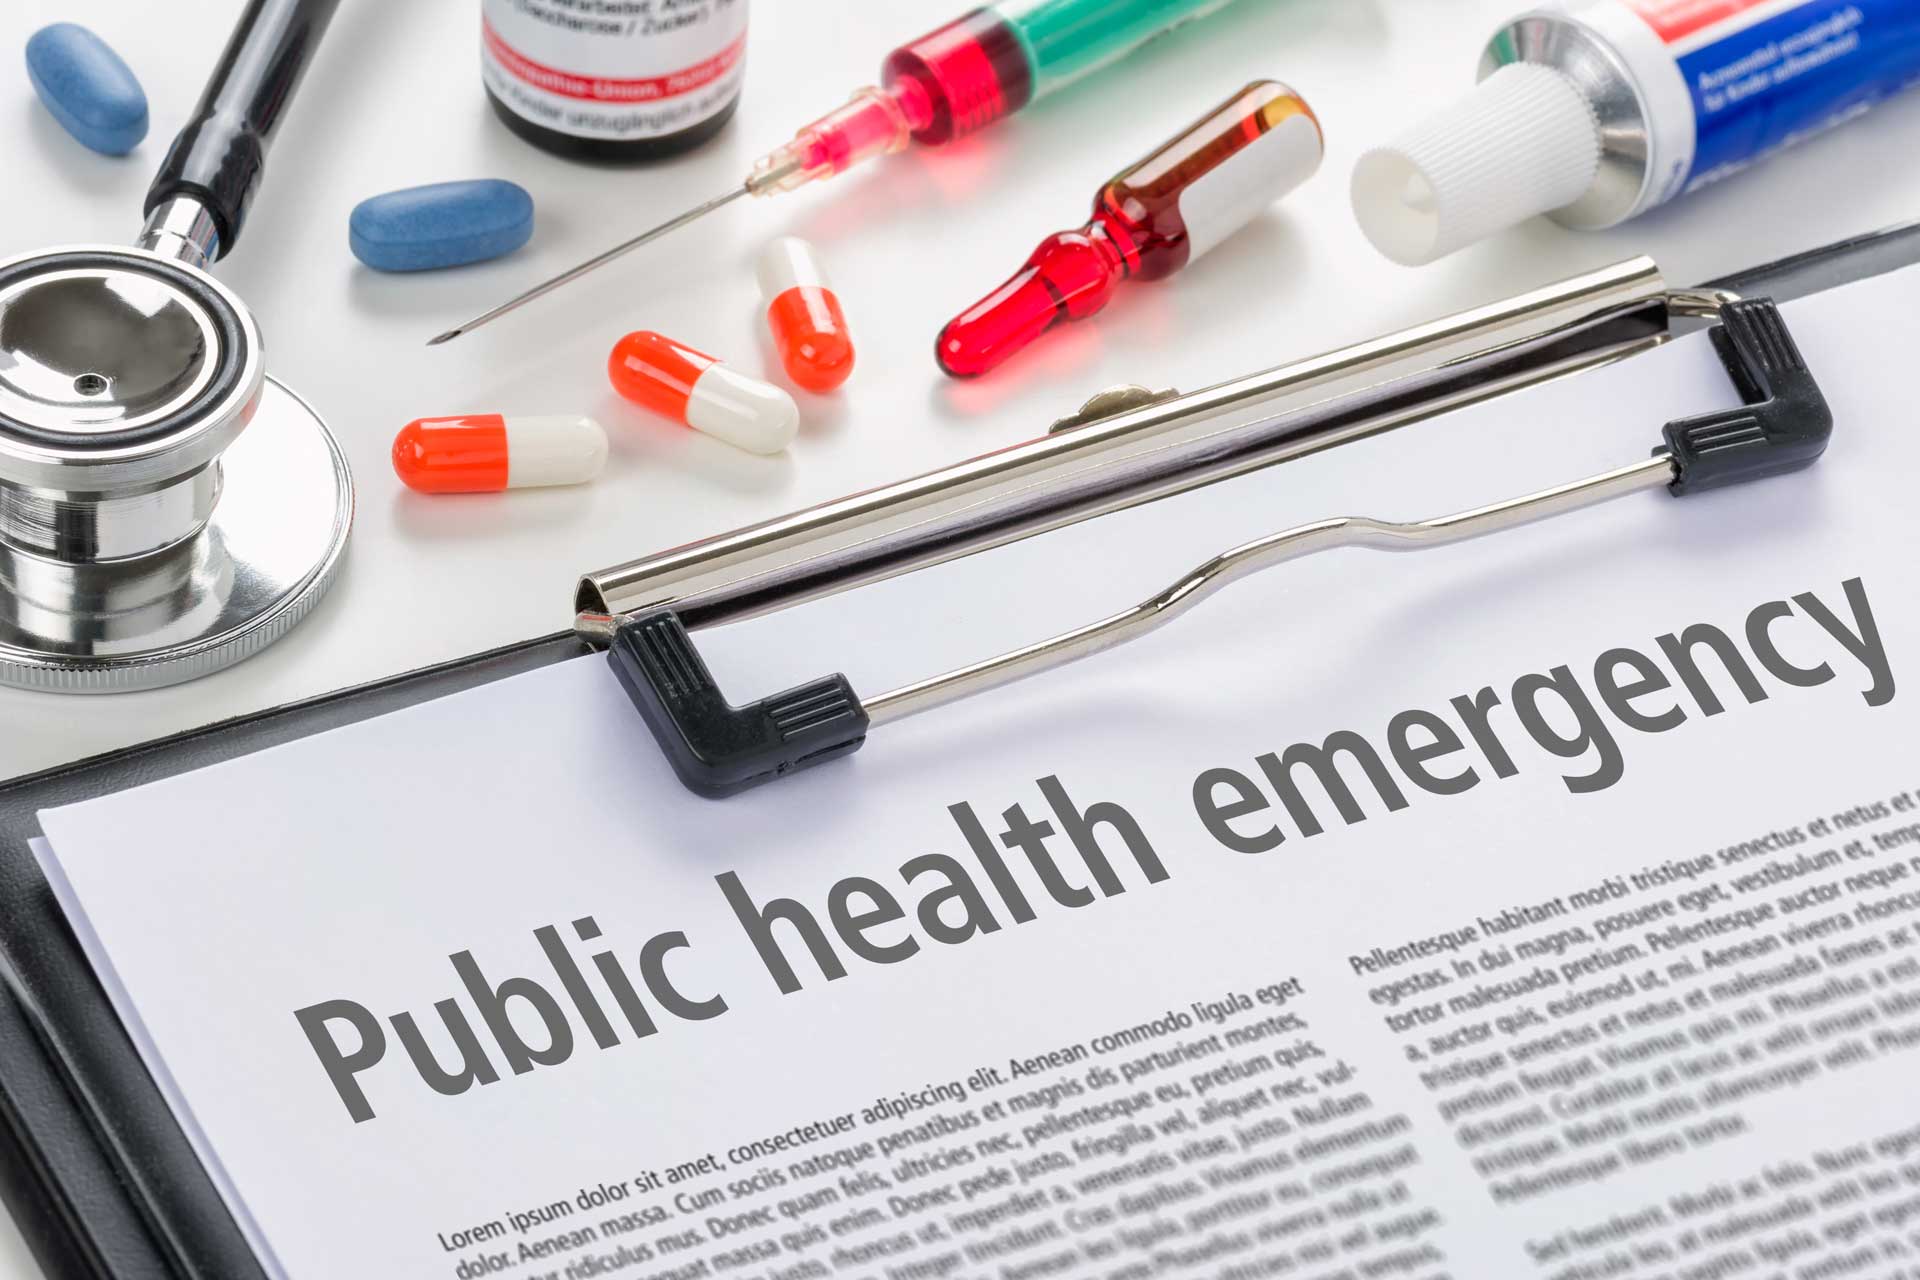 How Will the End of the Public Health Emergency Impact Your Organization and Finances?